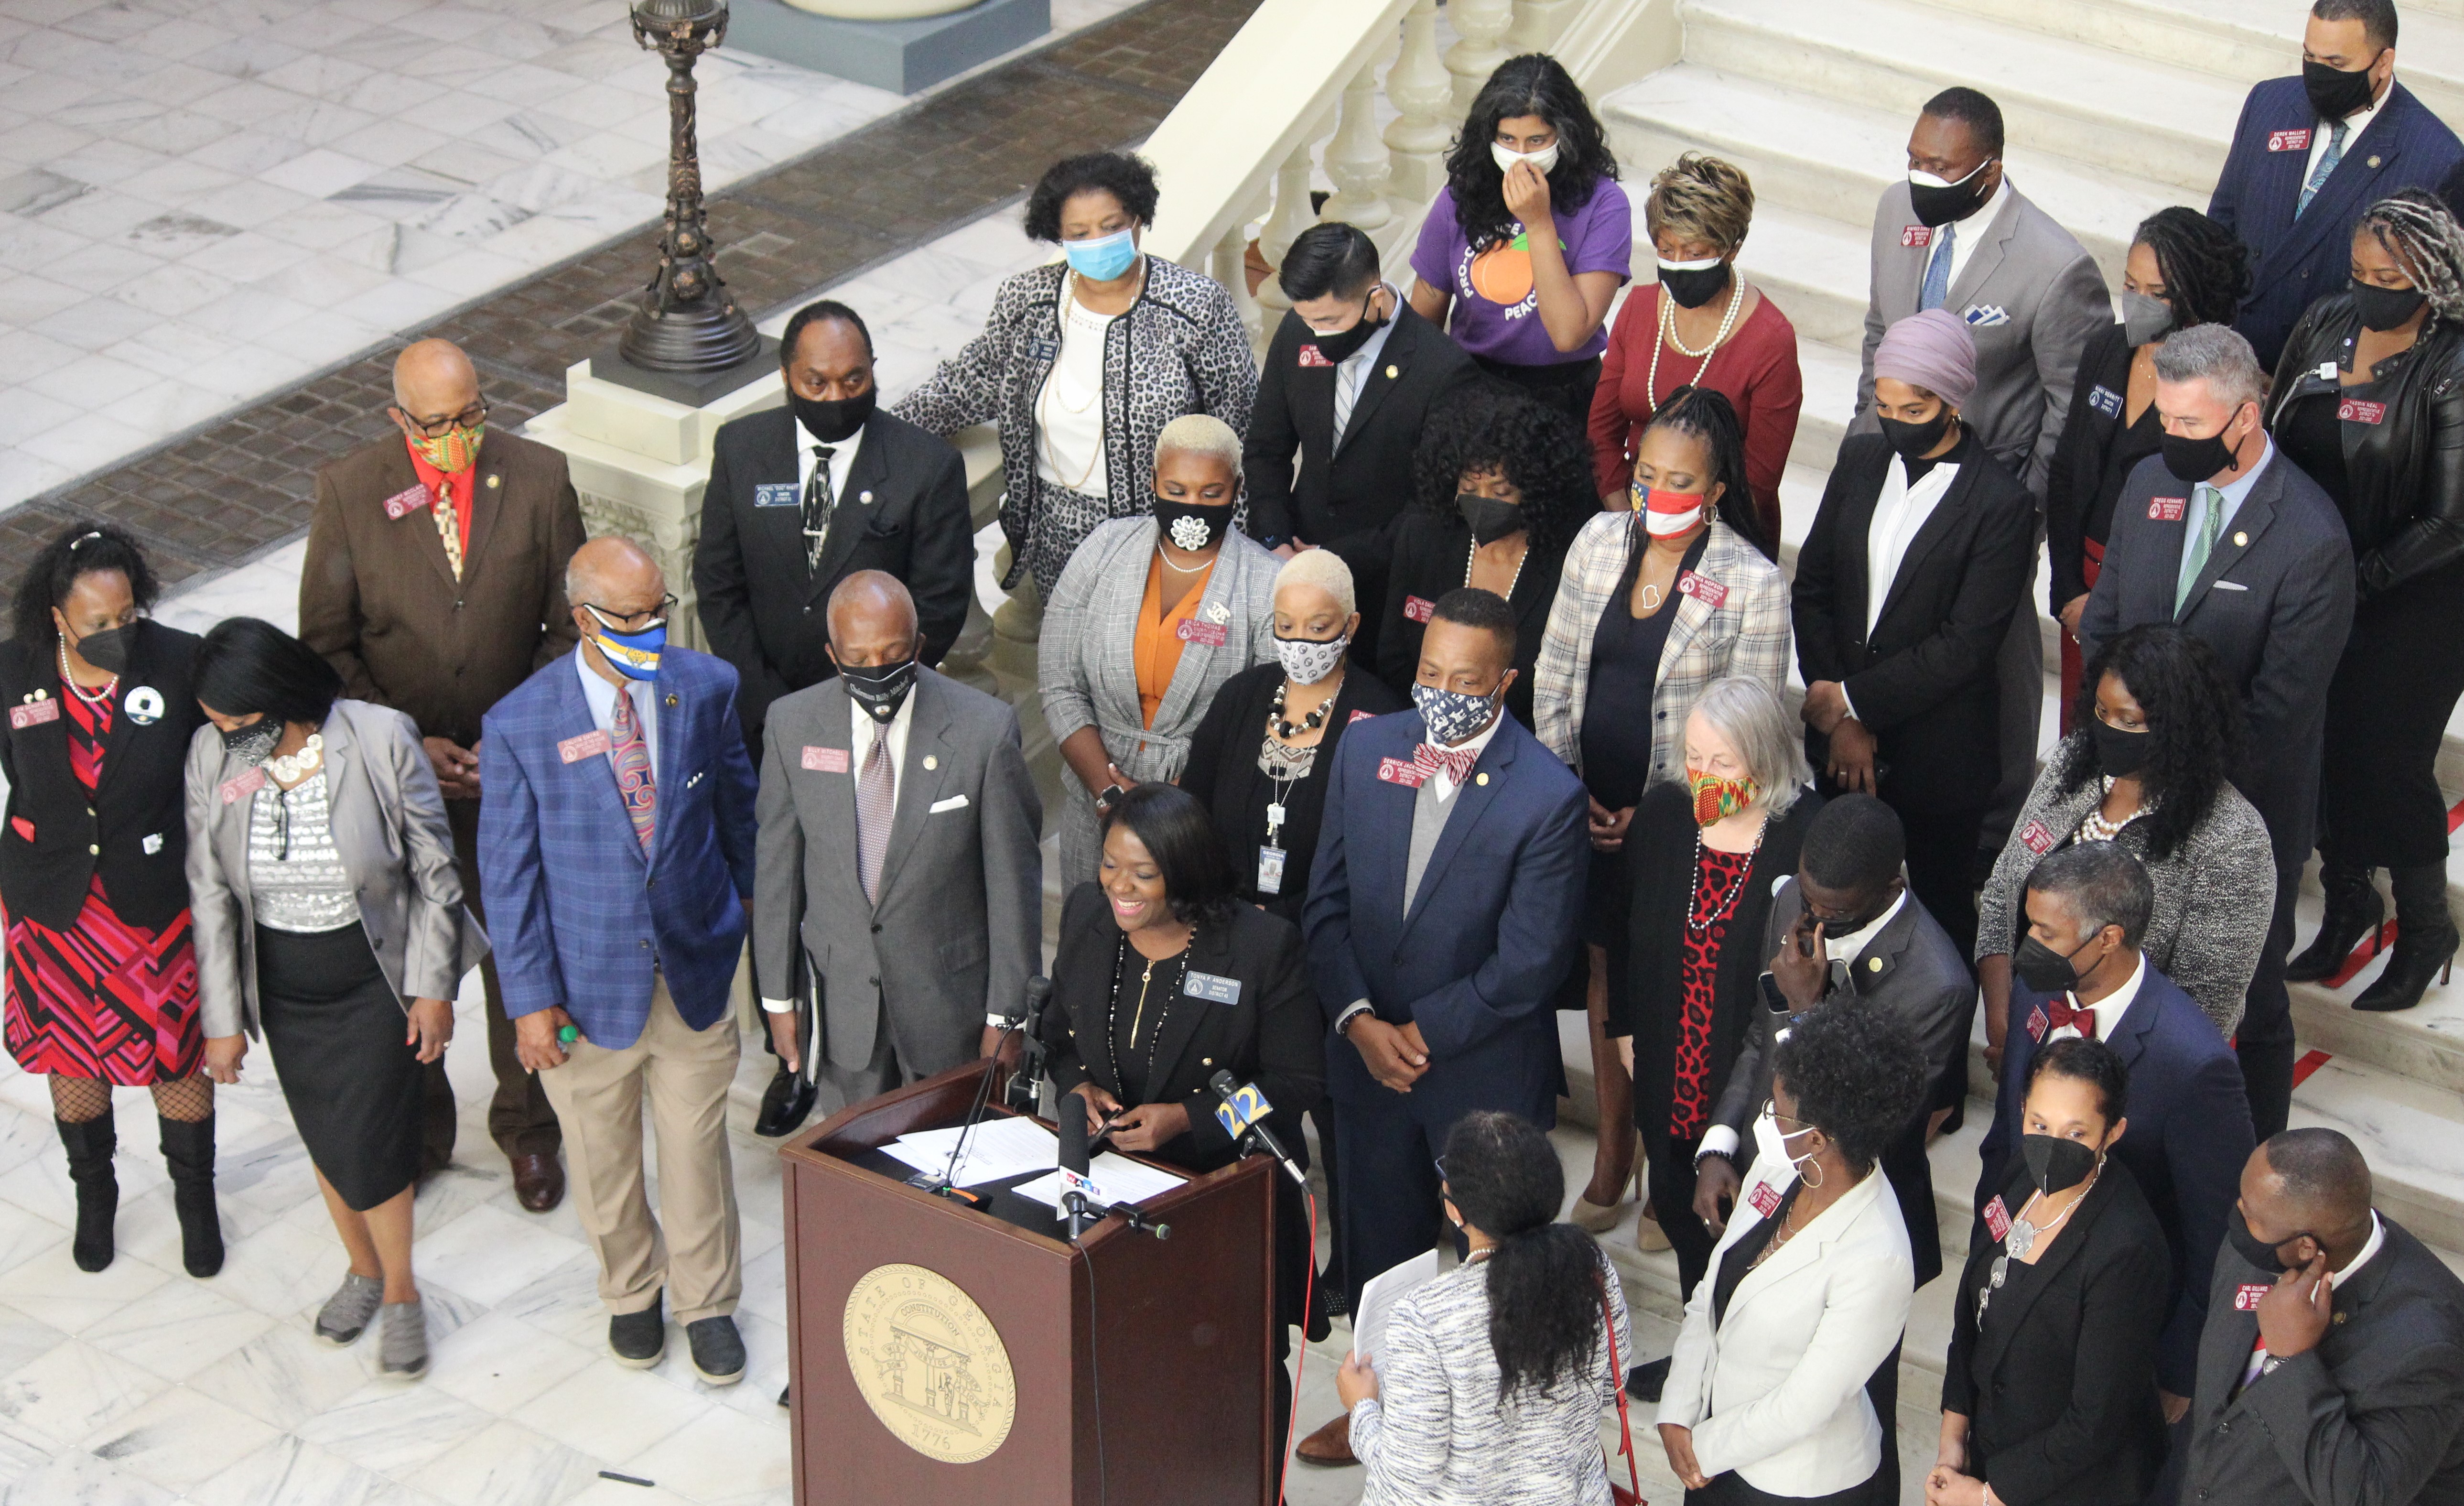 Members of the Georgia Legislative Black Caucus and allies gathered for a press conference inside the state Capitol Thursday afternoon. (Emil Moffatt/WABE)